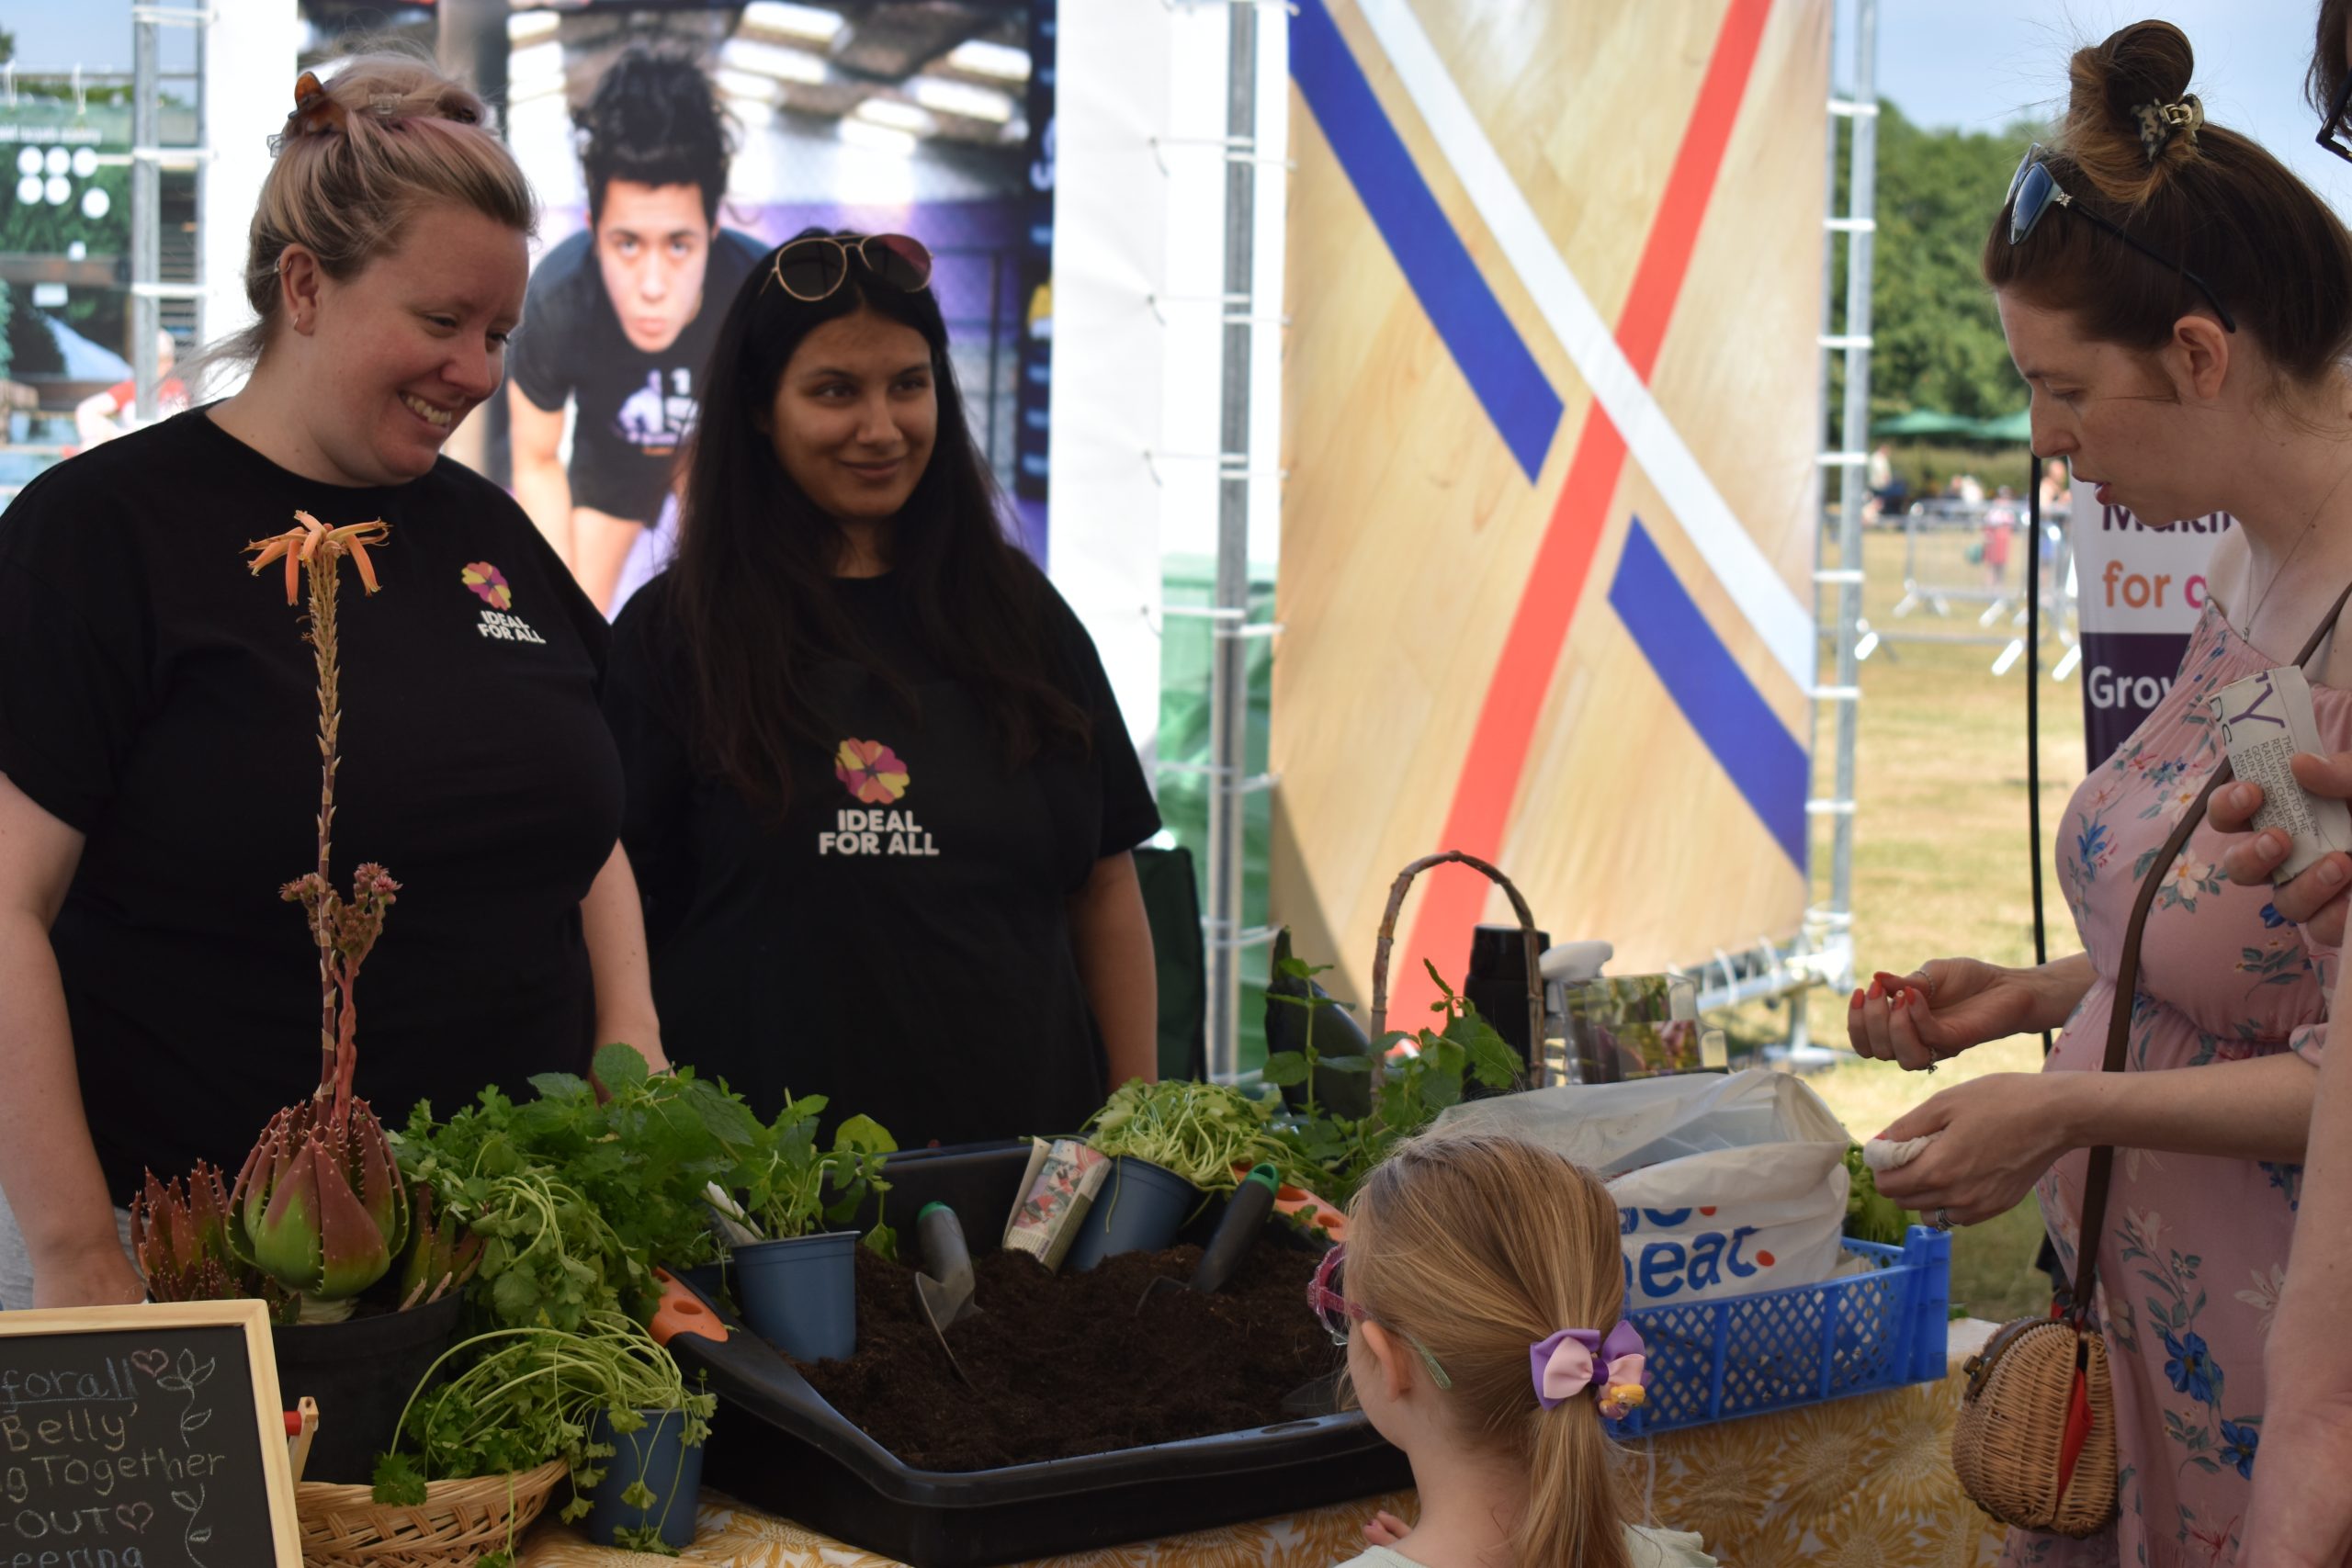 Festival goers at a previous SHAPE Youth Summer Fest, visiting a stall of plants